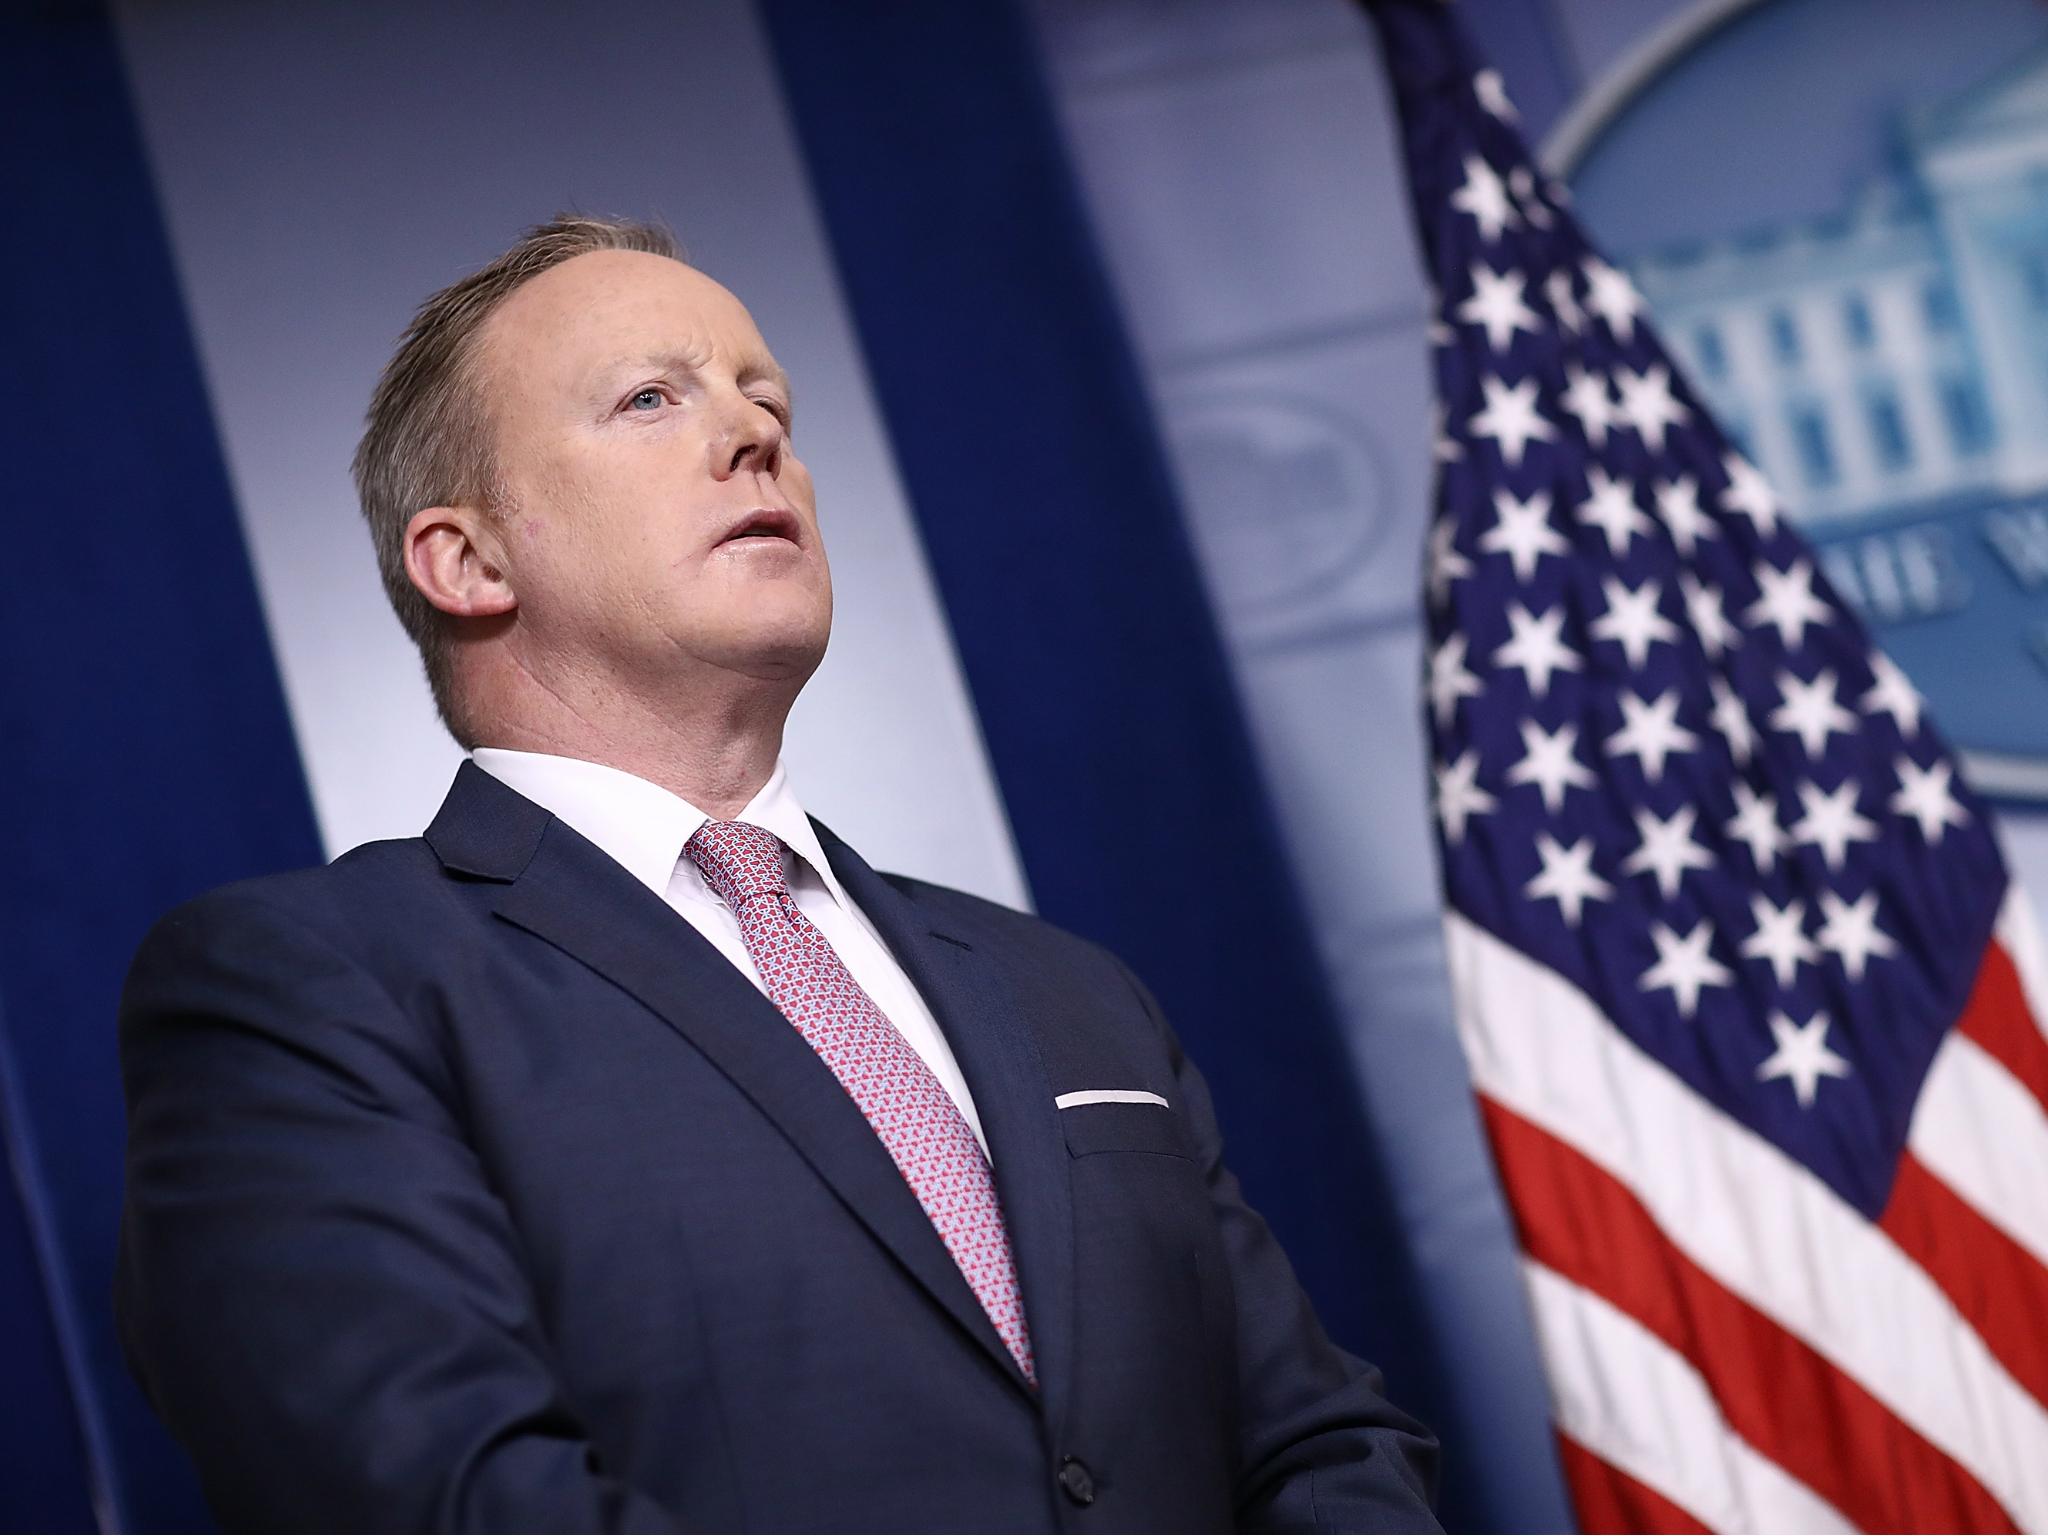 White House Press Secretary Sean Spicer said the President's tweets should be treated as official statements